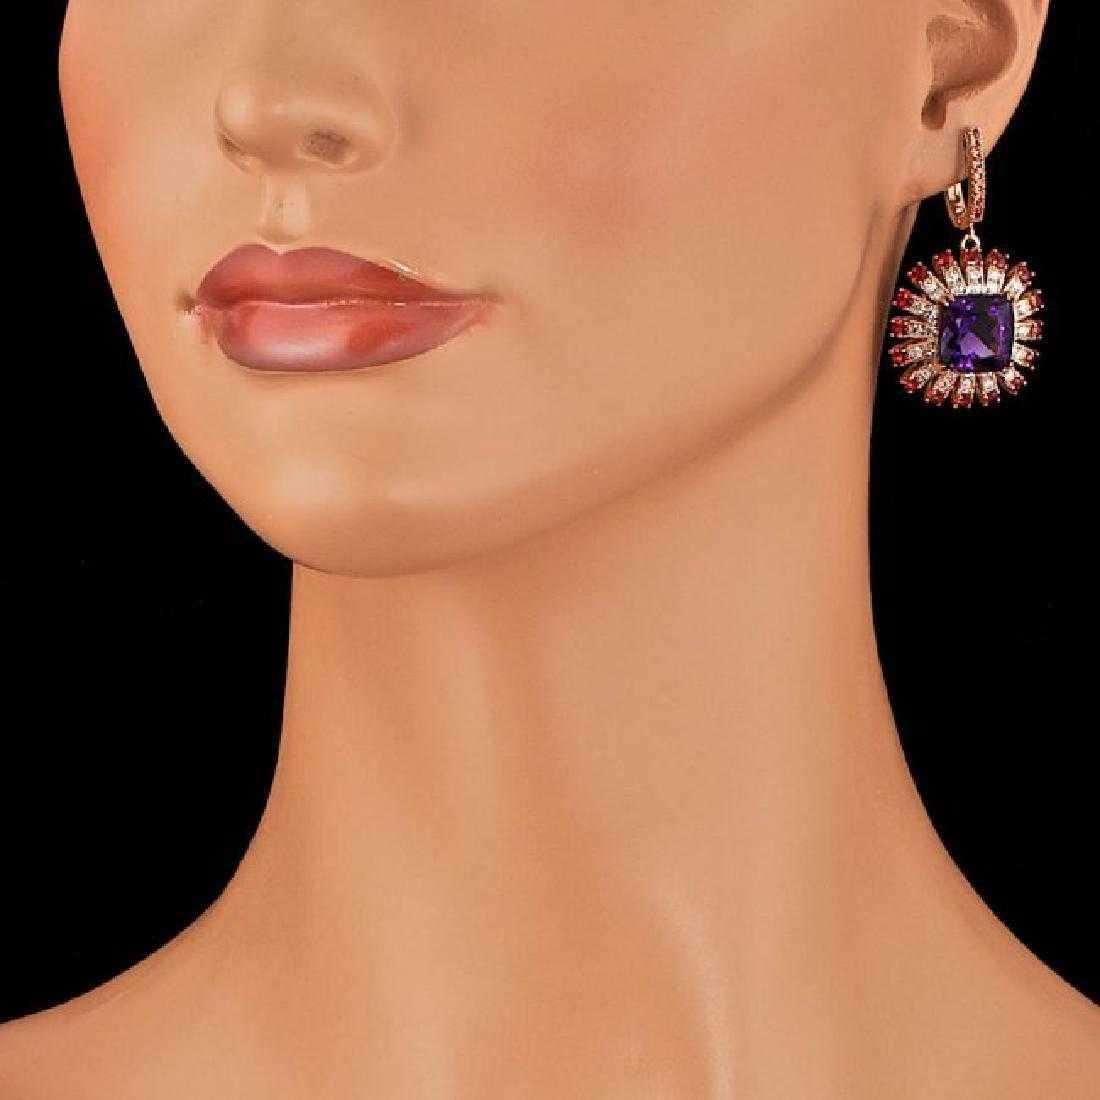 14K Rose Gold 18.76ct Amethyst 2.92ct Sapphire and 2.10ct Diamond Earrings